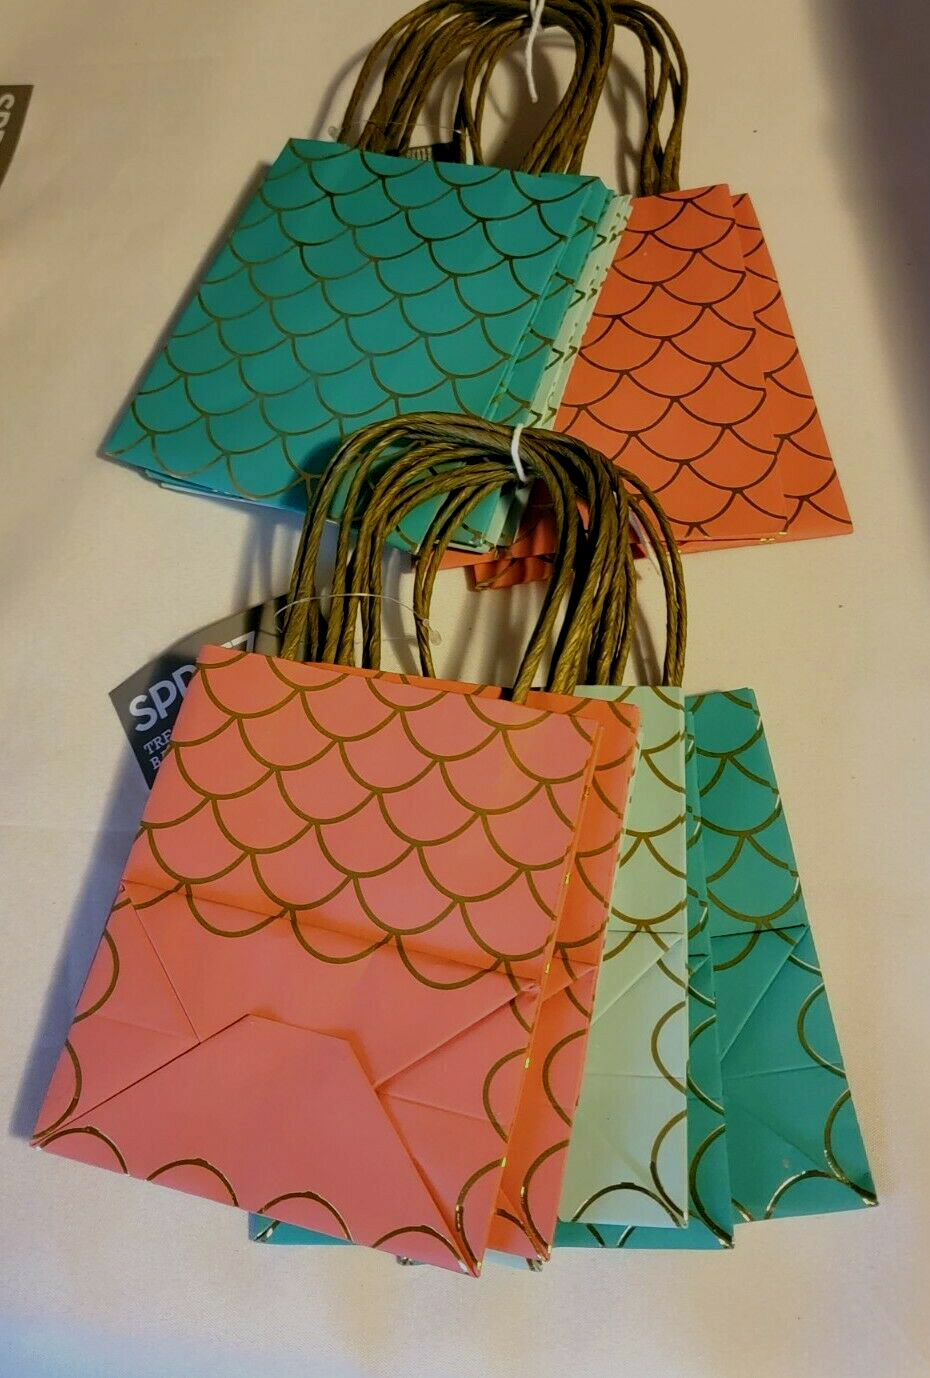 Primary image for Spritz Party Treat Bags Mermaid Scales 6x5 Aqua Pink Salmon Handles 12 count 